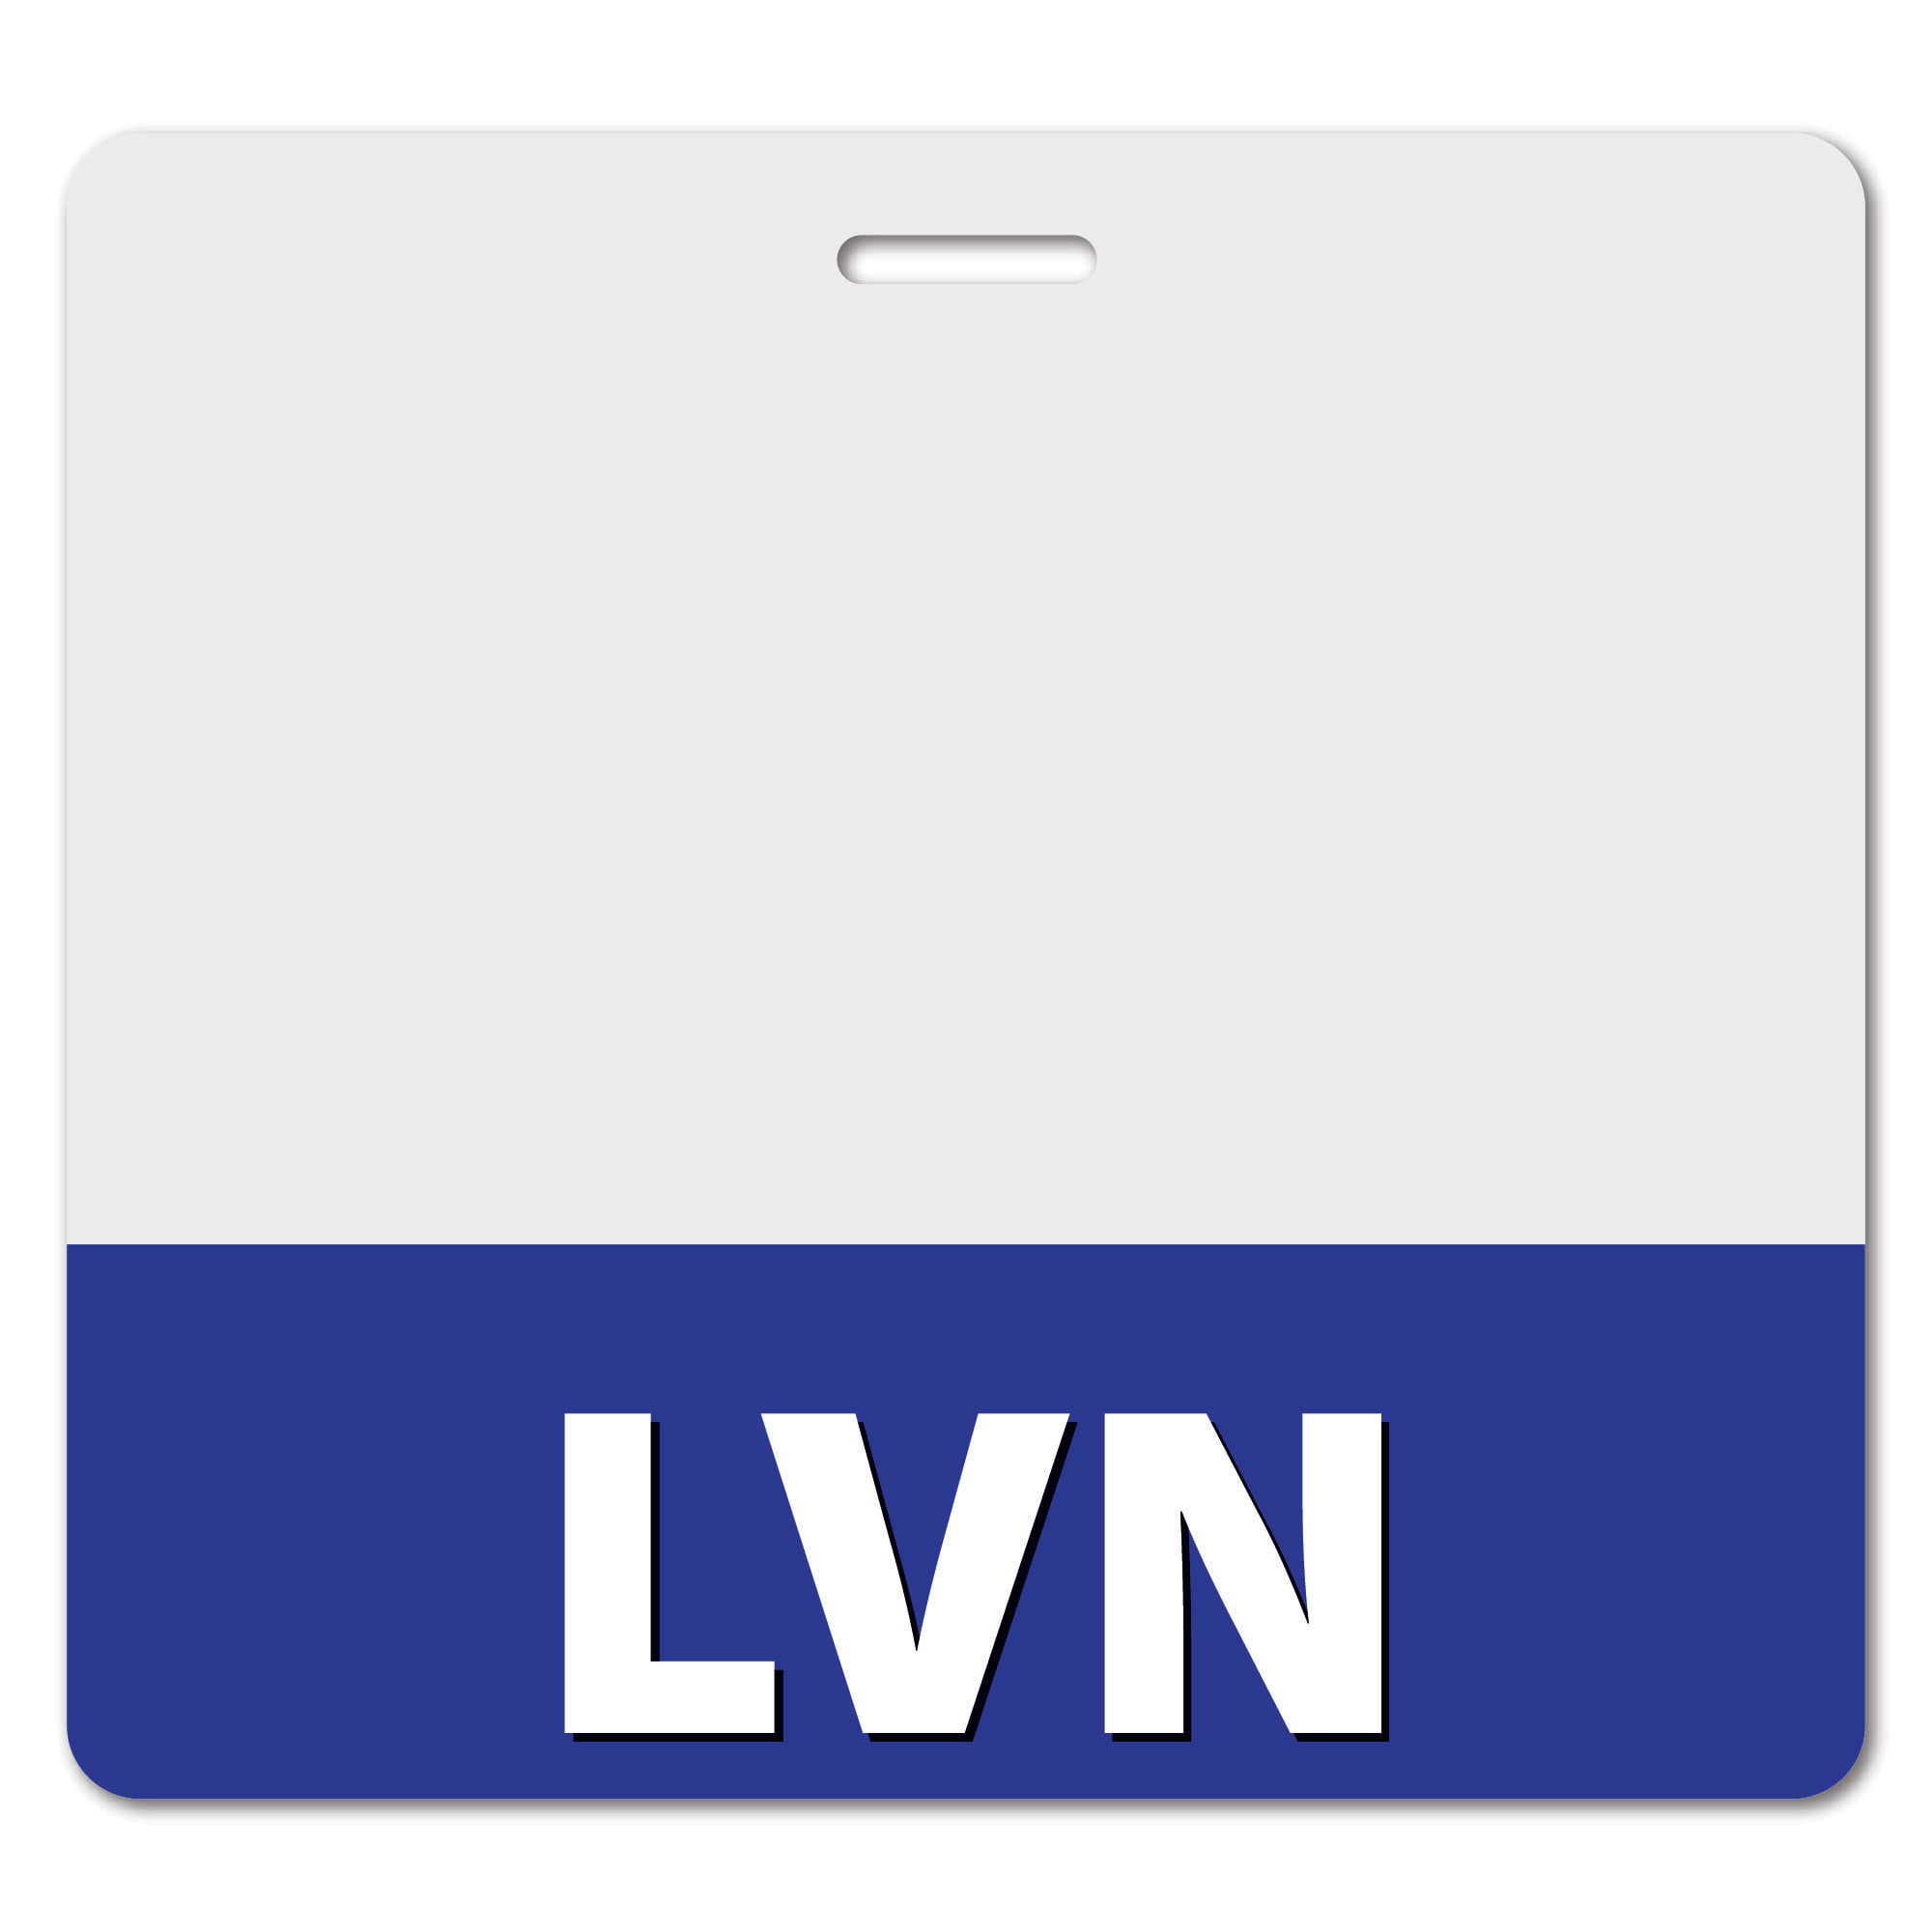 LVN Heavy Duty Horizontal Light Purple (1 Pack) - Spill & Tear Proof Cards  - 2 Sided USA Printed Quick Role Identifier ID Tag Backer by BadgeZoo